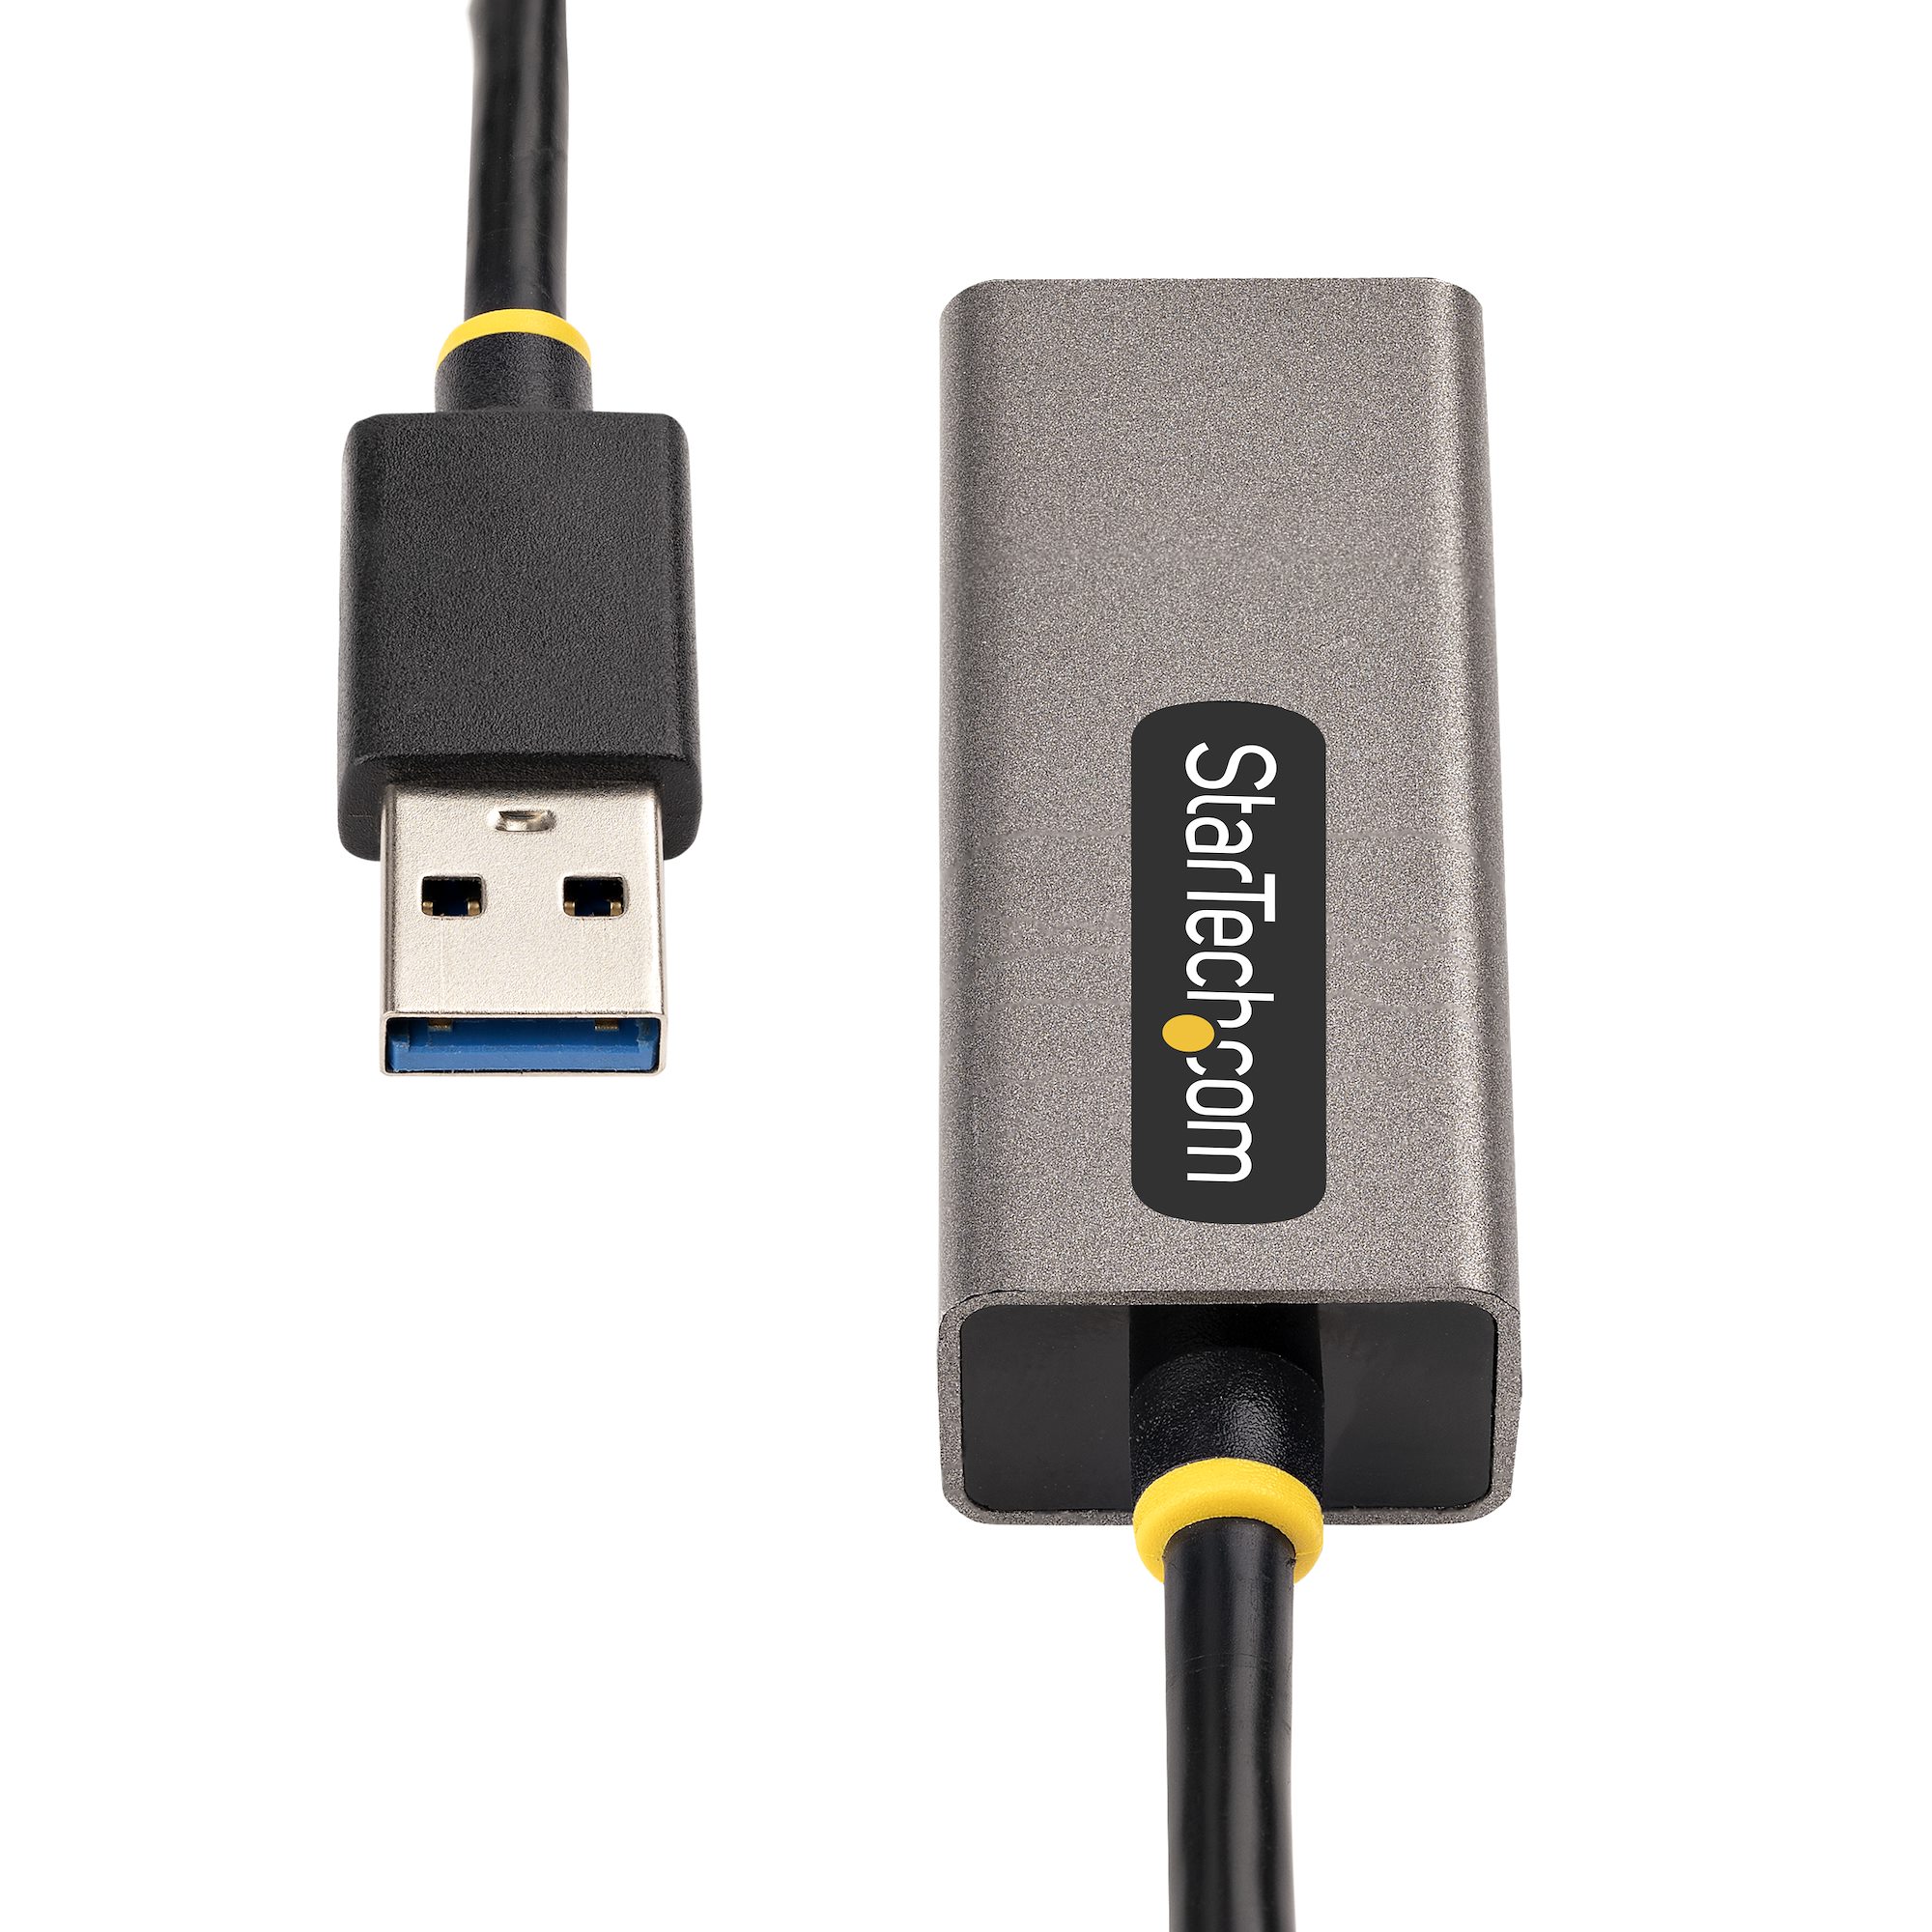 USB 3.0 to Ethernet Adapter, GbE Adapter - USB and Thunderbolt 